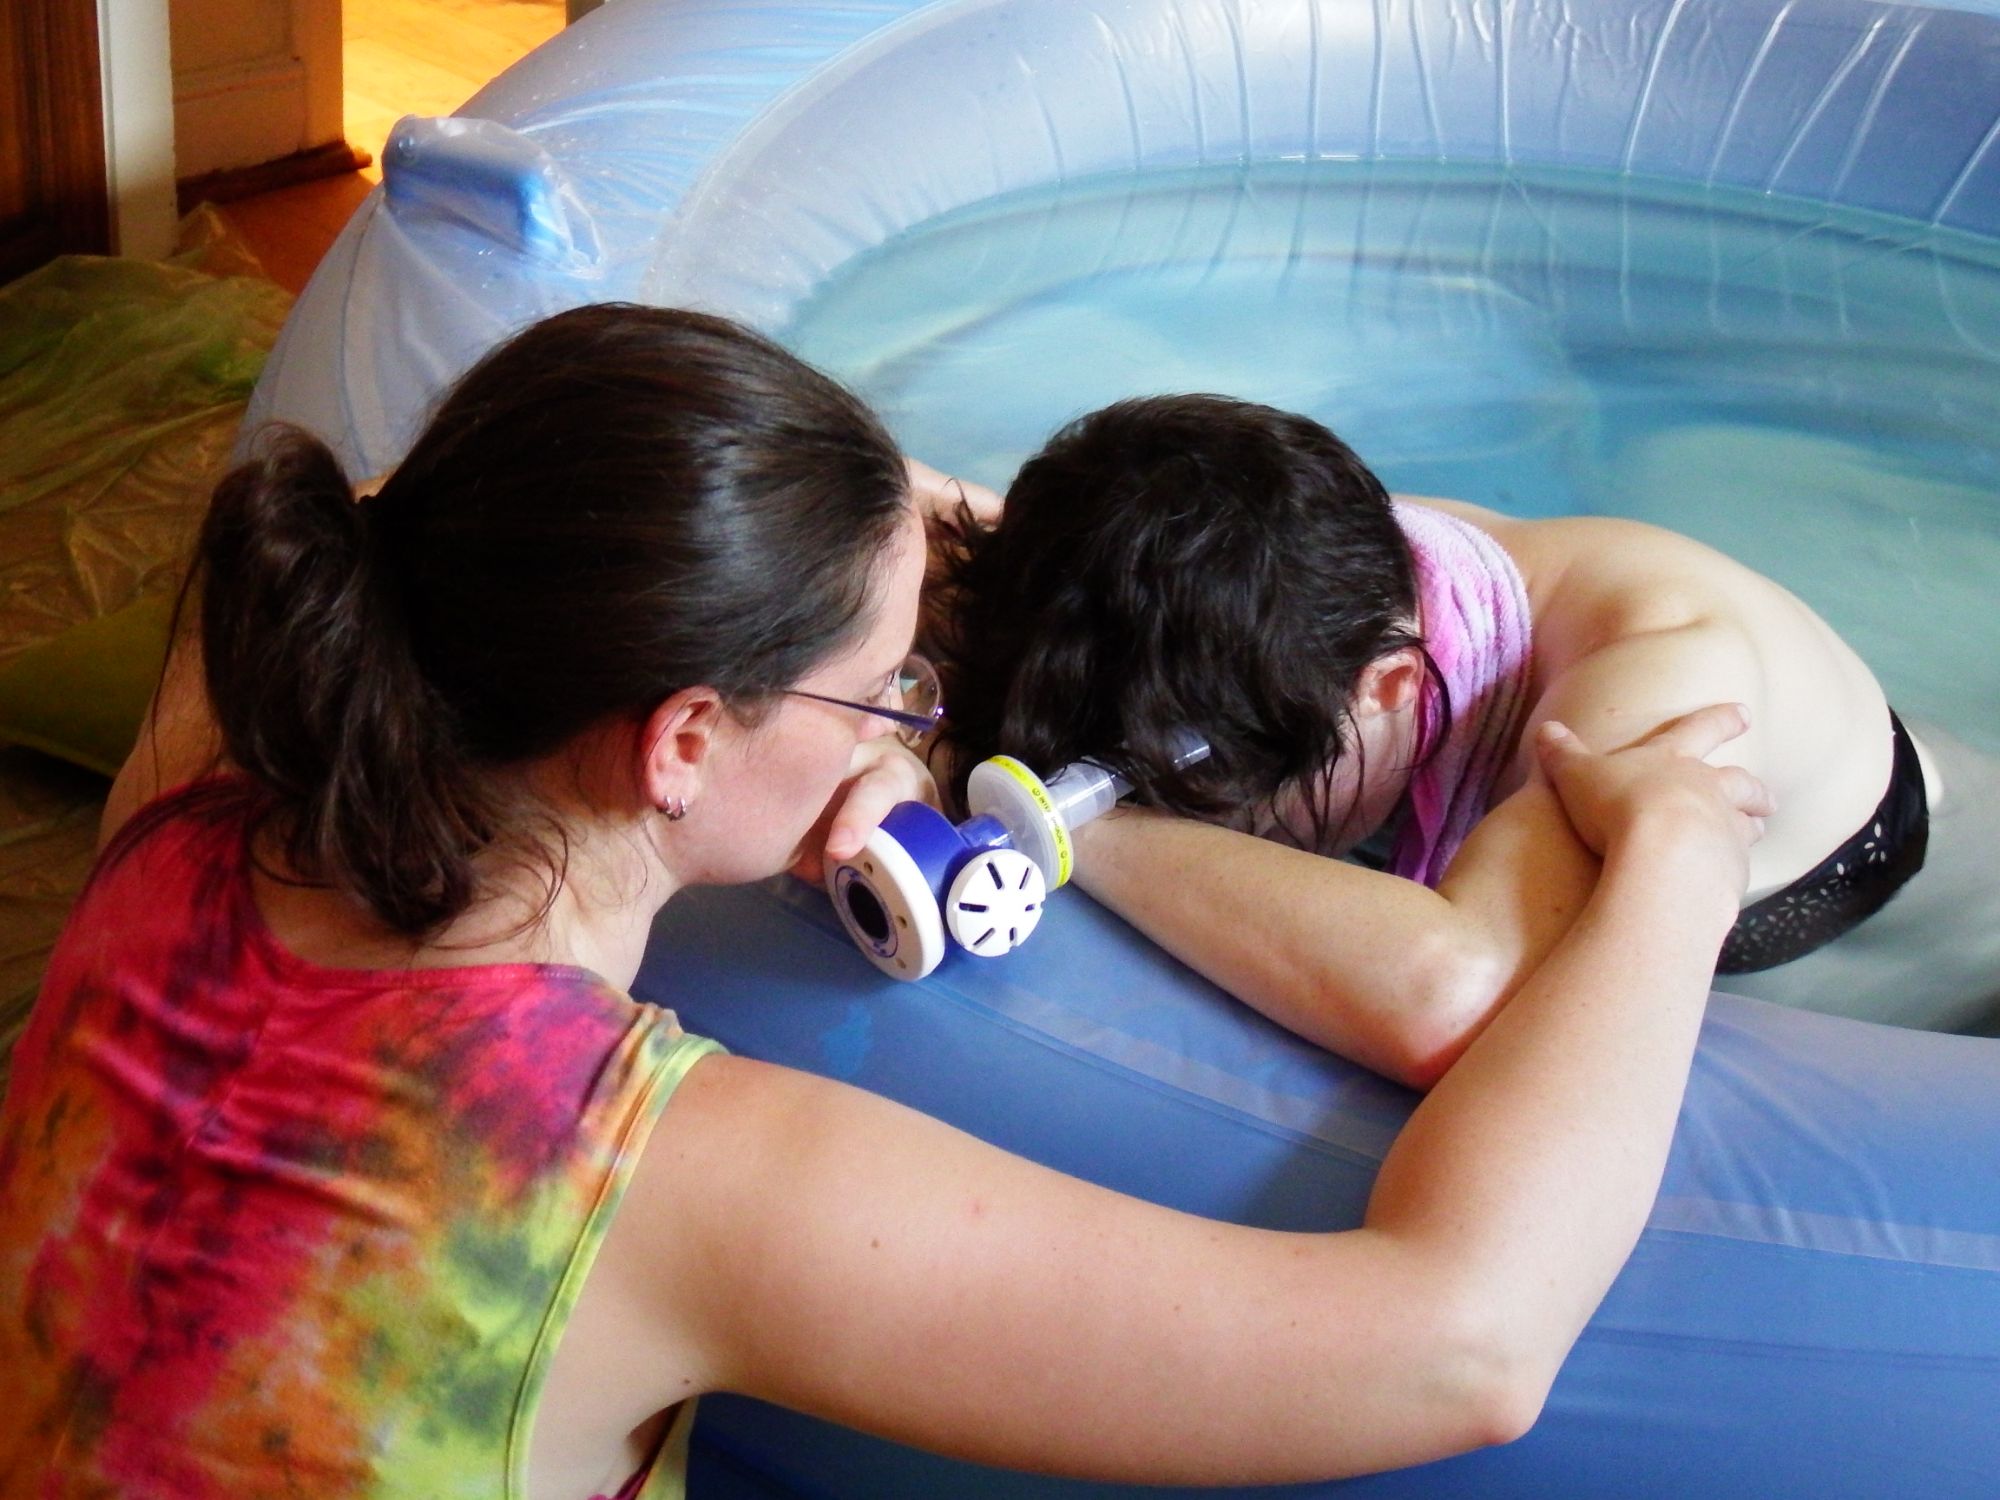 A woman leans over the side of a birth pool. She is holding gas & air in her hand. Caz is holding her arms suppotively.